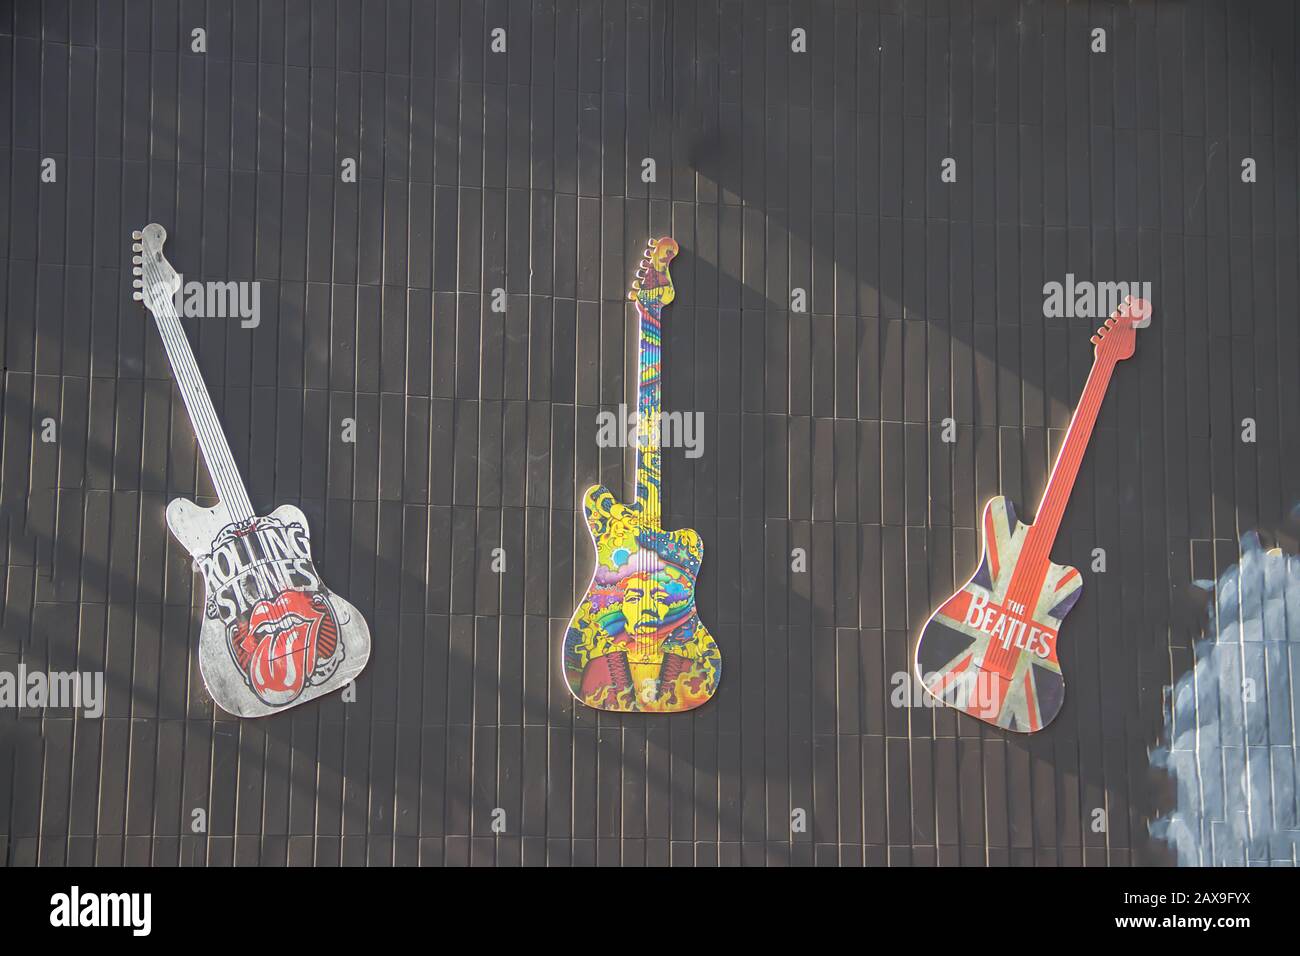 Home facade wall decoration by replica of 3 guitars, Rolling Stones, Jimmy Hendrix, The Beatles Stock Photo